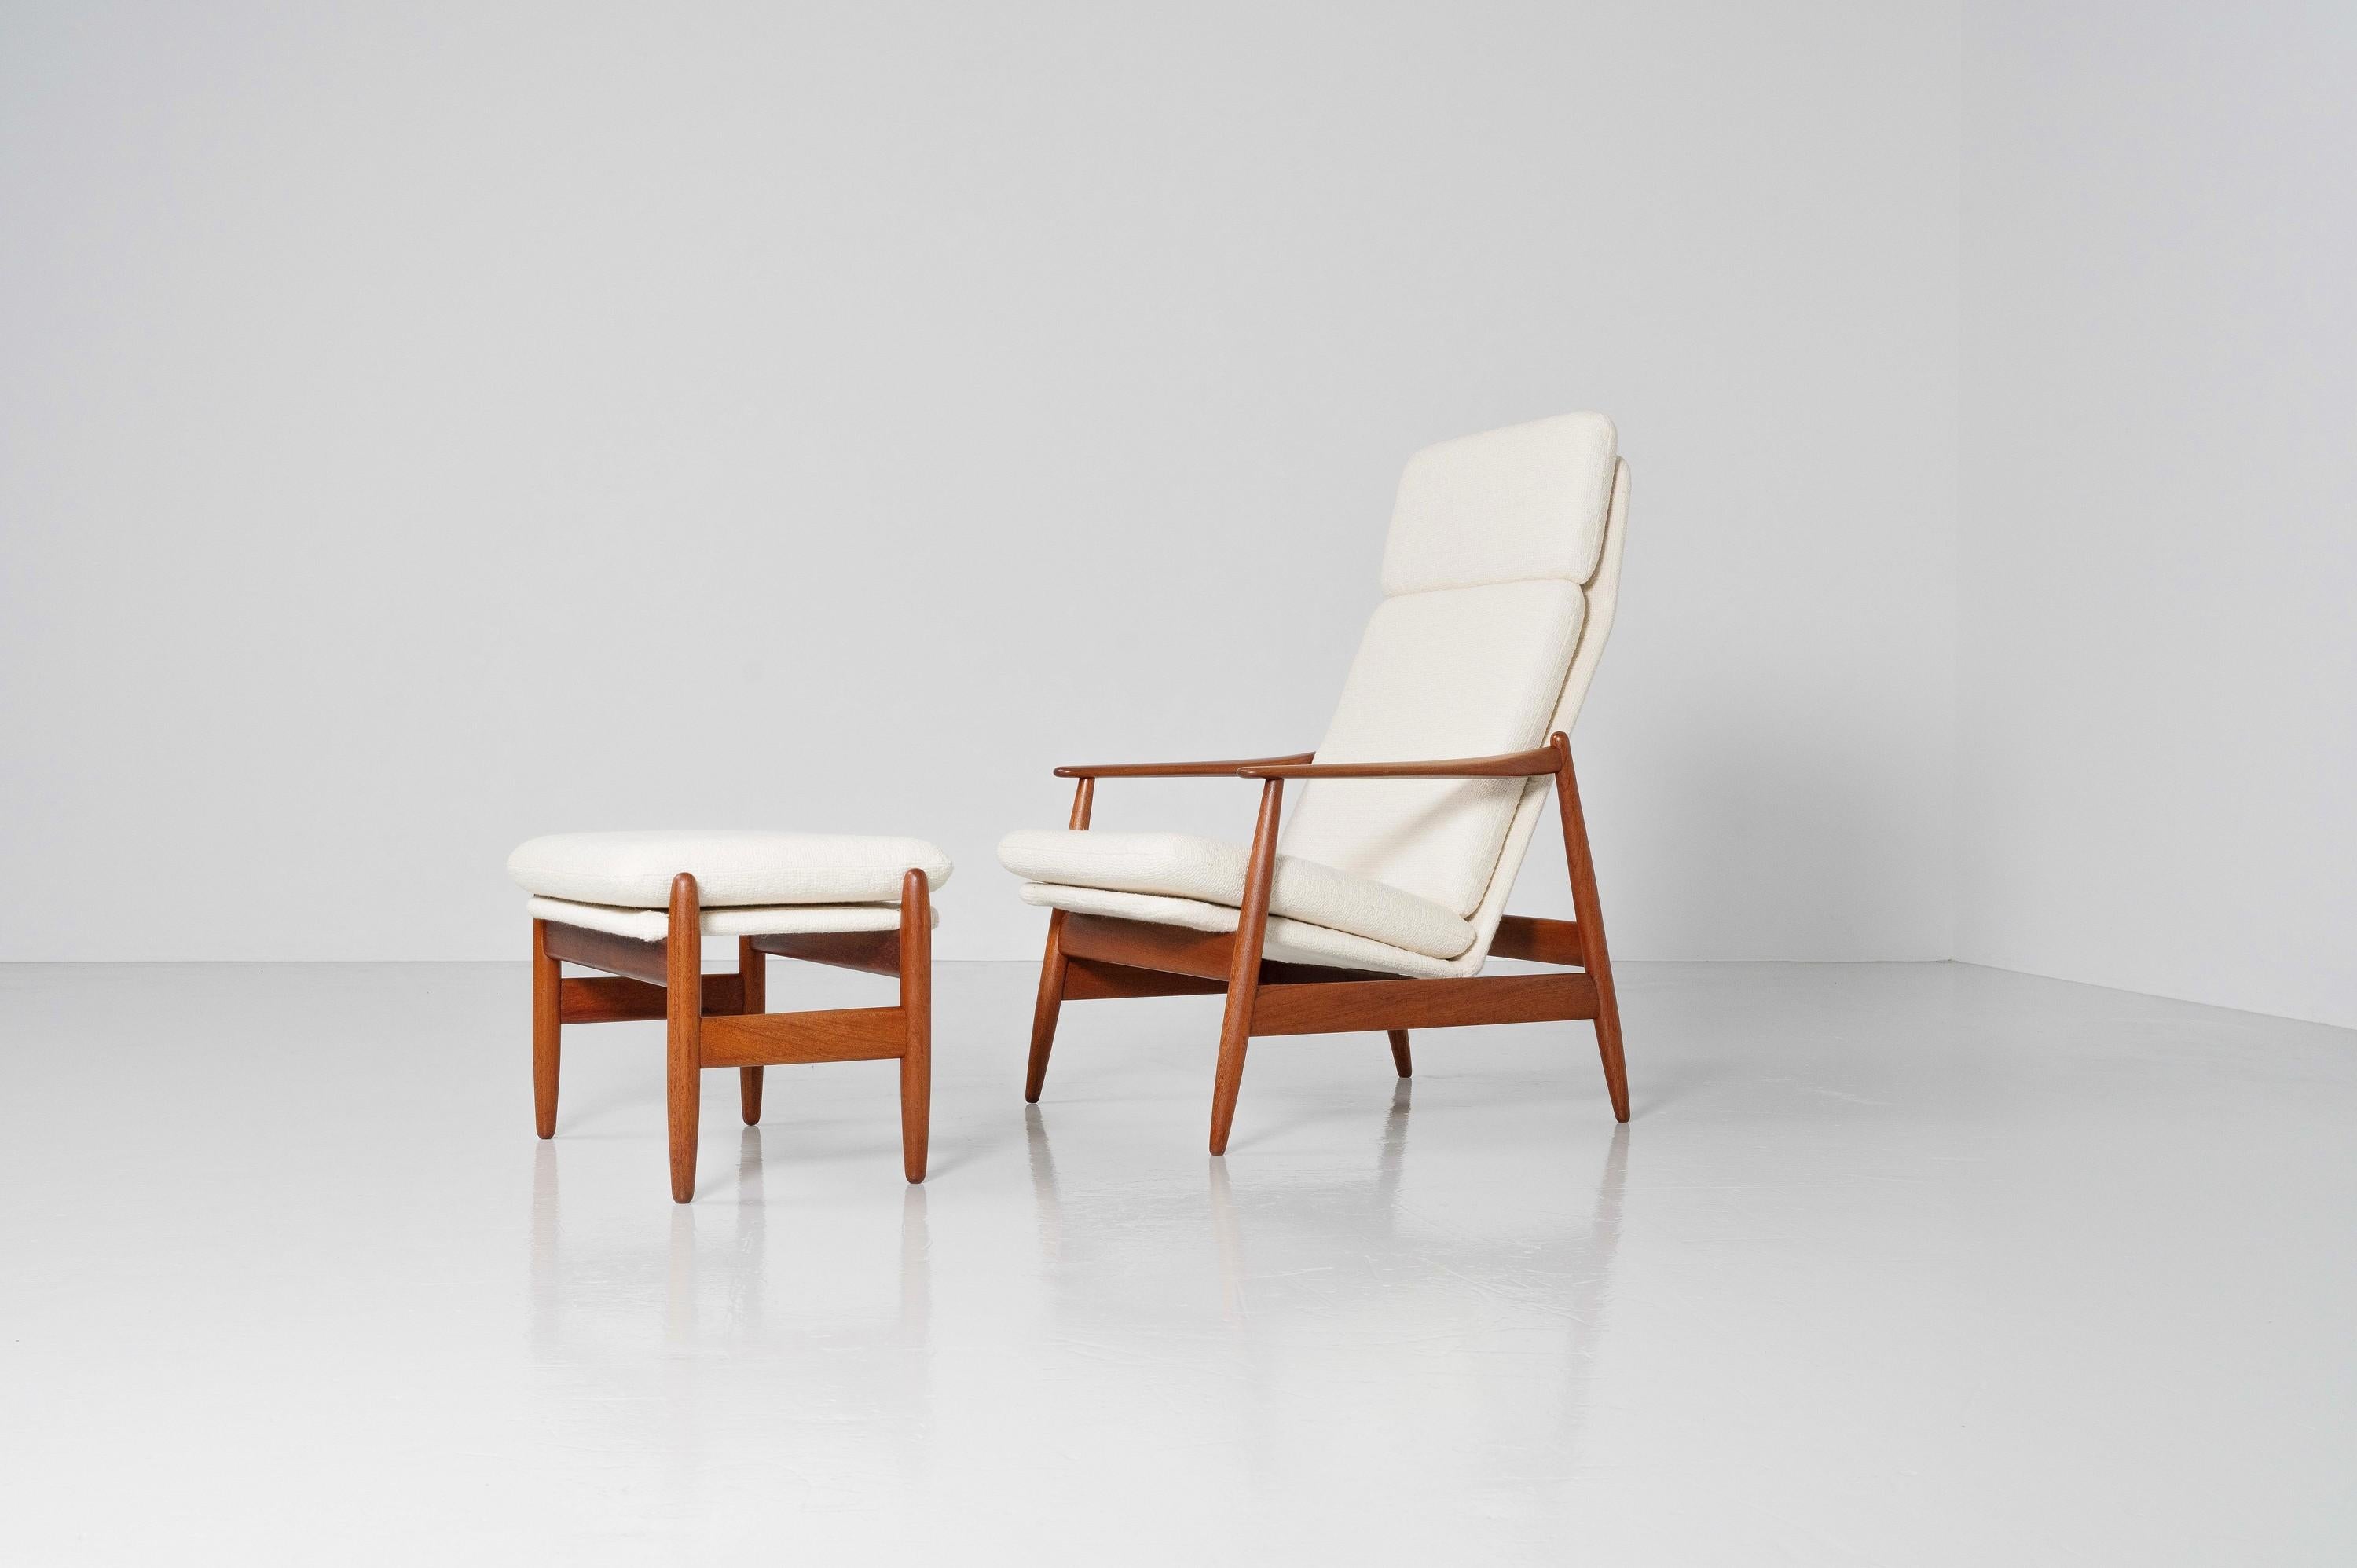 Comfortable and typical Scandinavian shaped lounge chair designed by Poul M. Volther and manufactured by Frem Røjle, Denmark 1960. The chair has a solid teak wooden frame and has its tyipcal carpentry details which the Danish woodworkers were proud